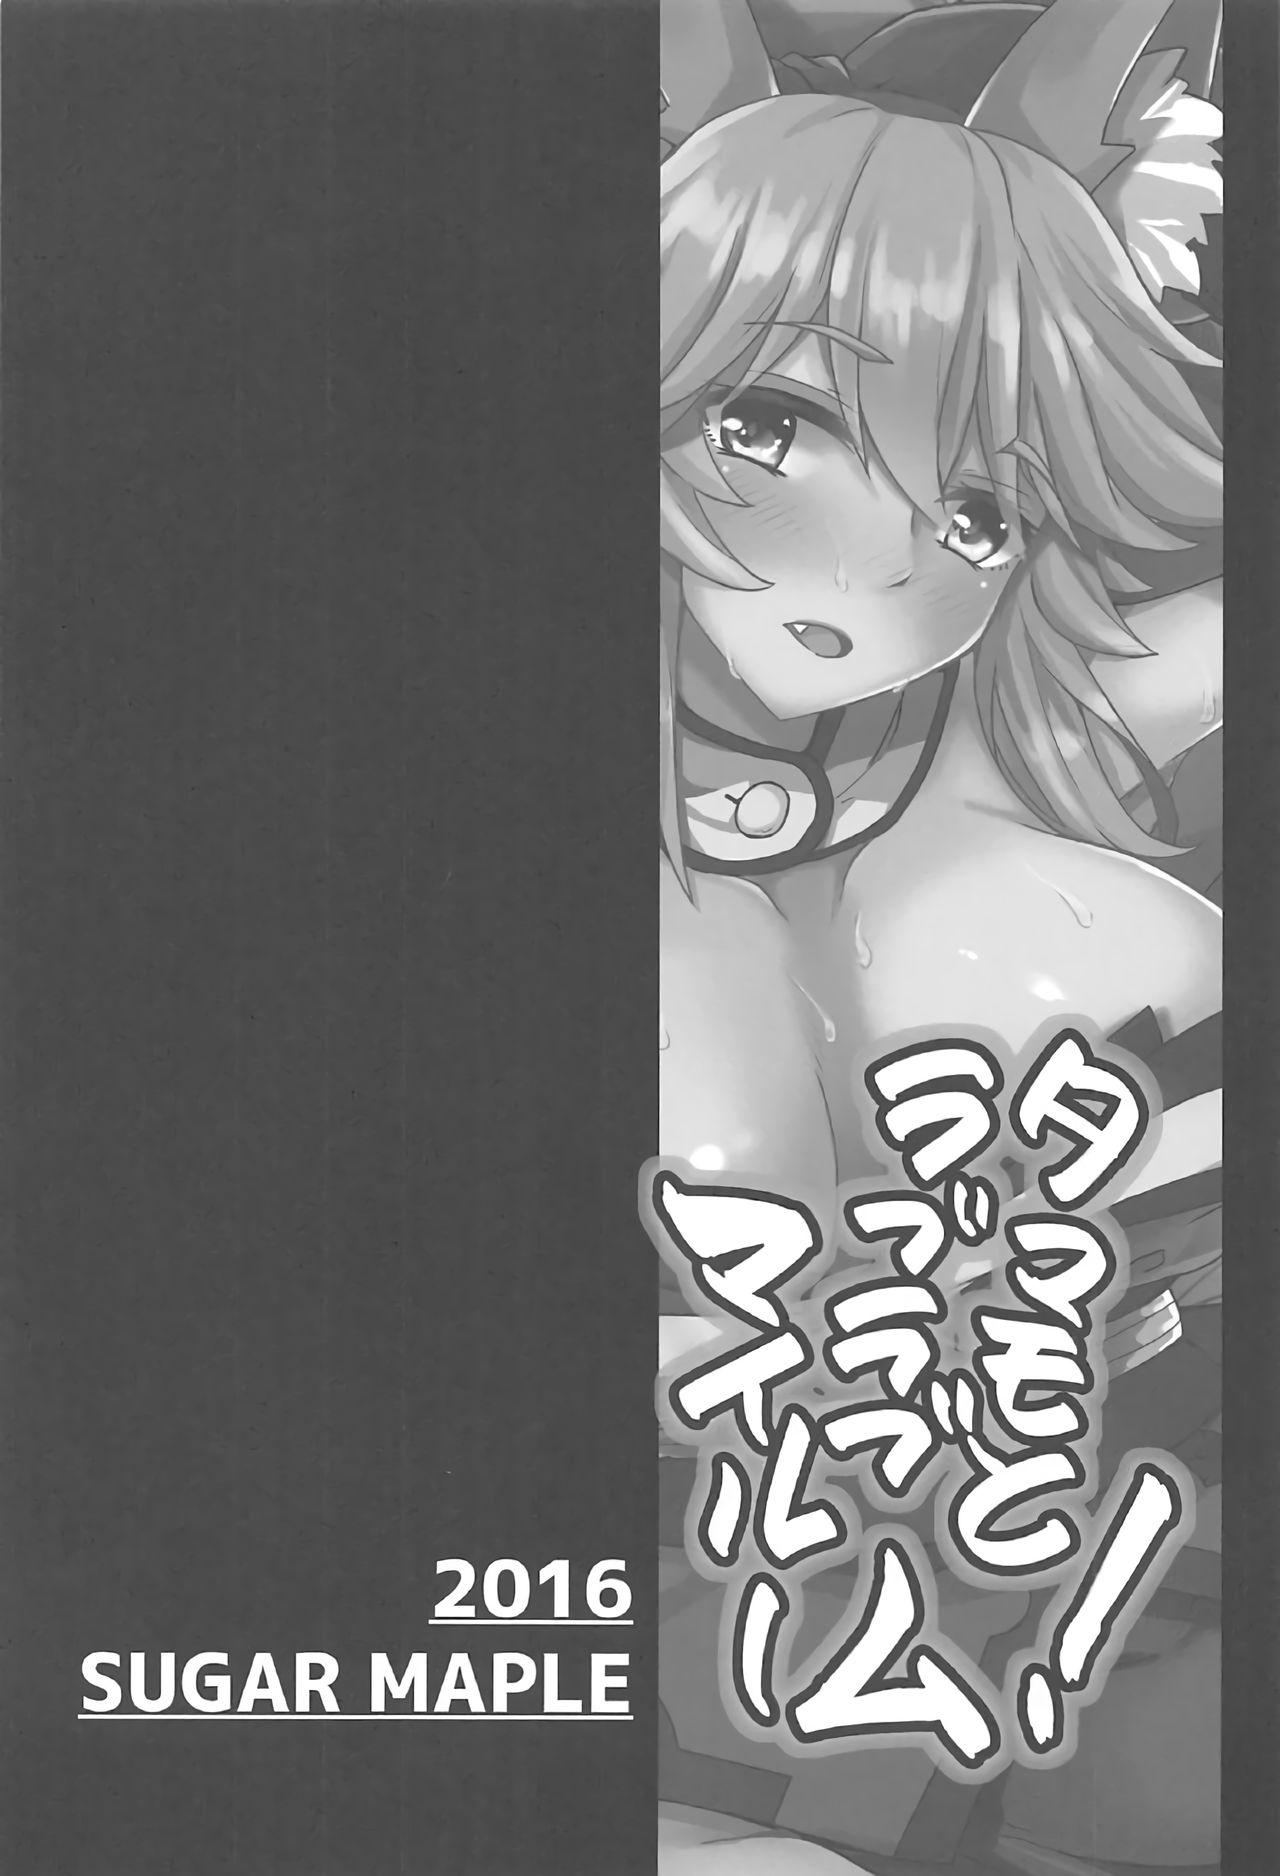 Grosso Tamamo to Love Love My Room! - Fate extra Tinder - Page 3